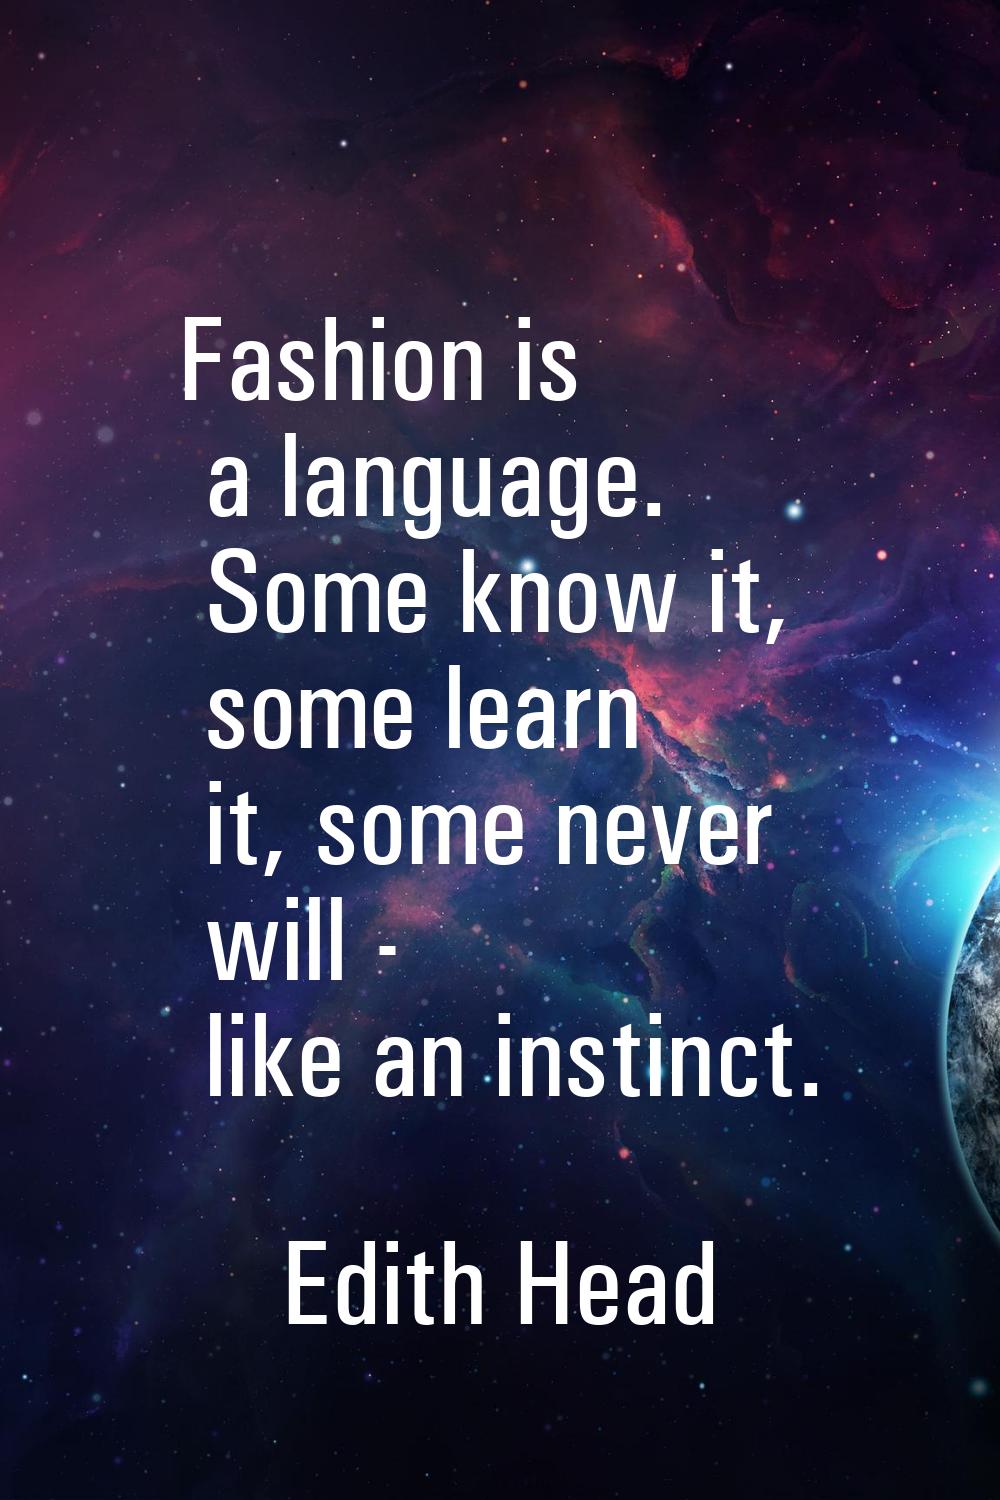 Fashion is a language. Some know it, some learn it, some never will - like an instinct.